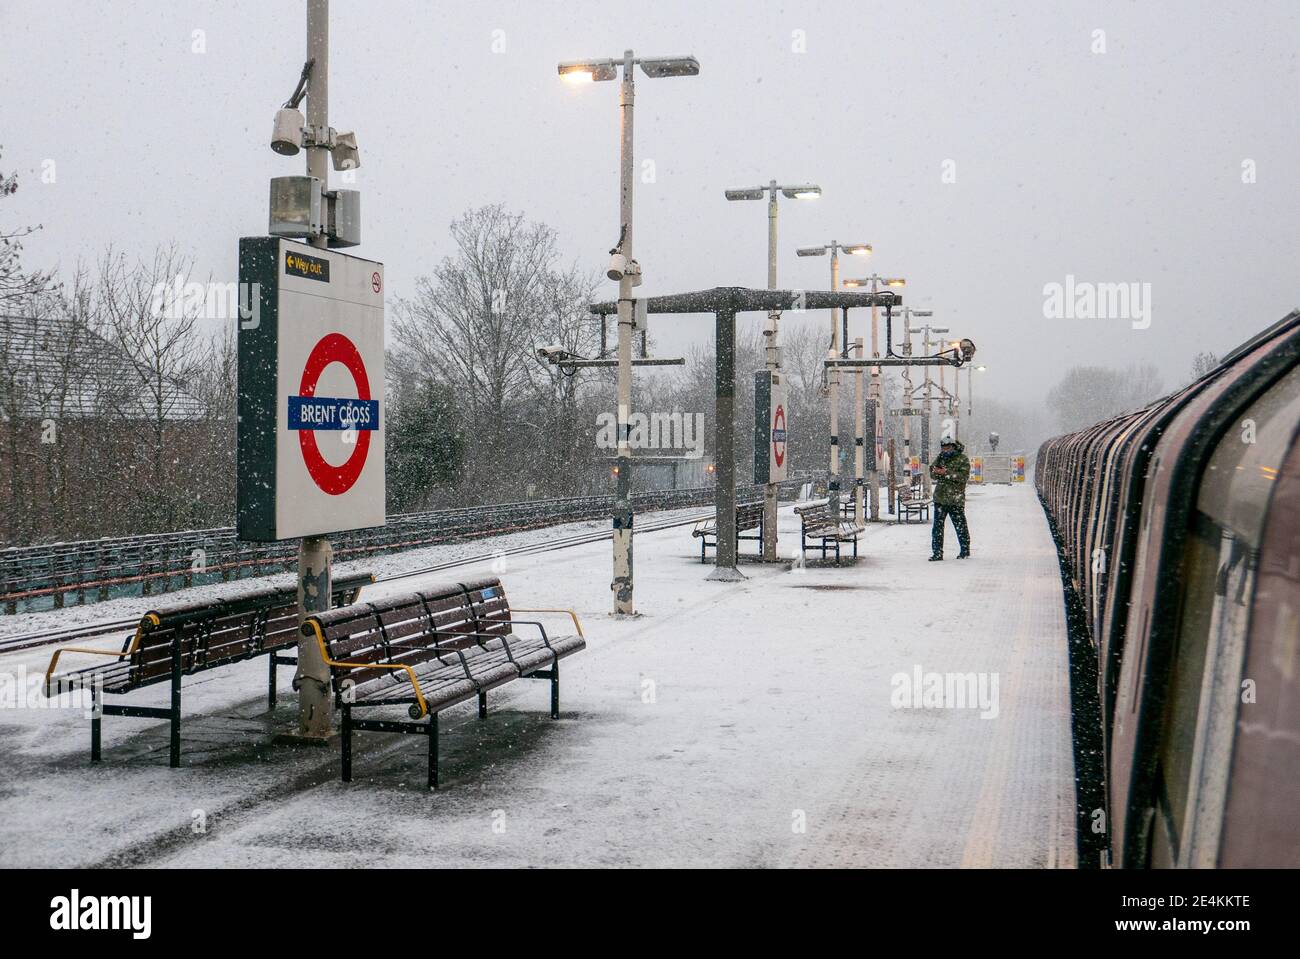 A lone man exits or alights train onto a snow-covered platform at Brent Cross tube station. The platform is icy and snow covered due to a lack of grit salt being applied by Transport for London staff despite weather warnings. London. UK Weather. Stock Photo